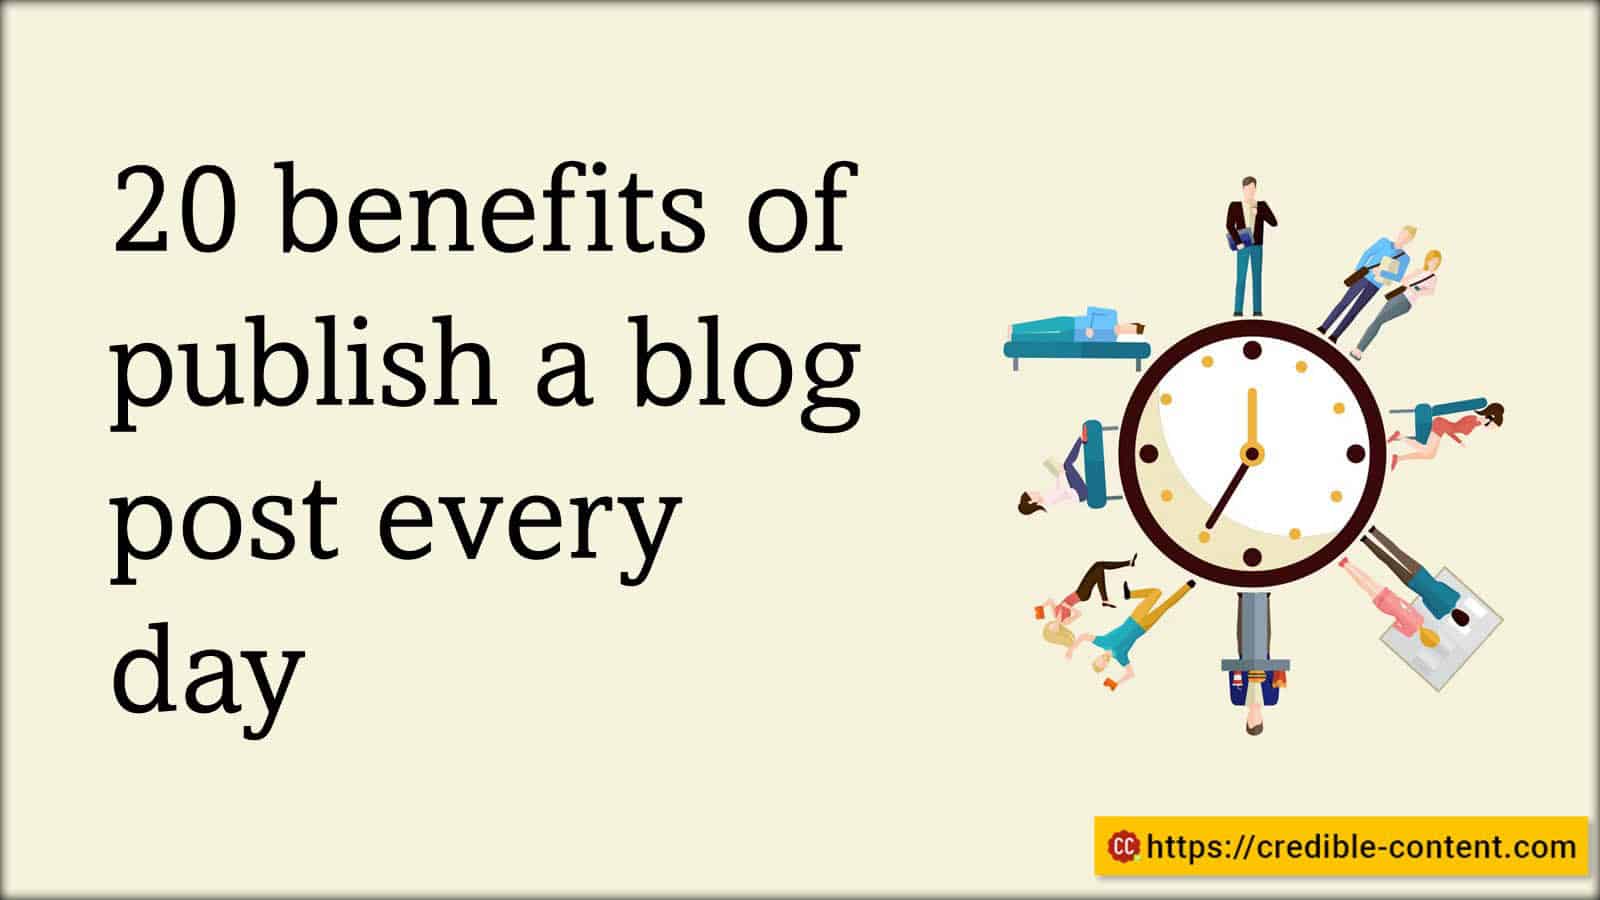 20 benefits of publishing a blog post every day